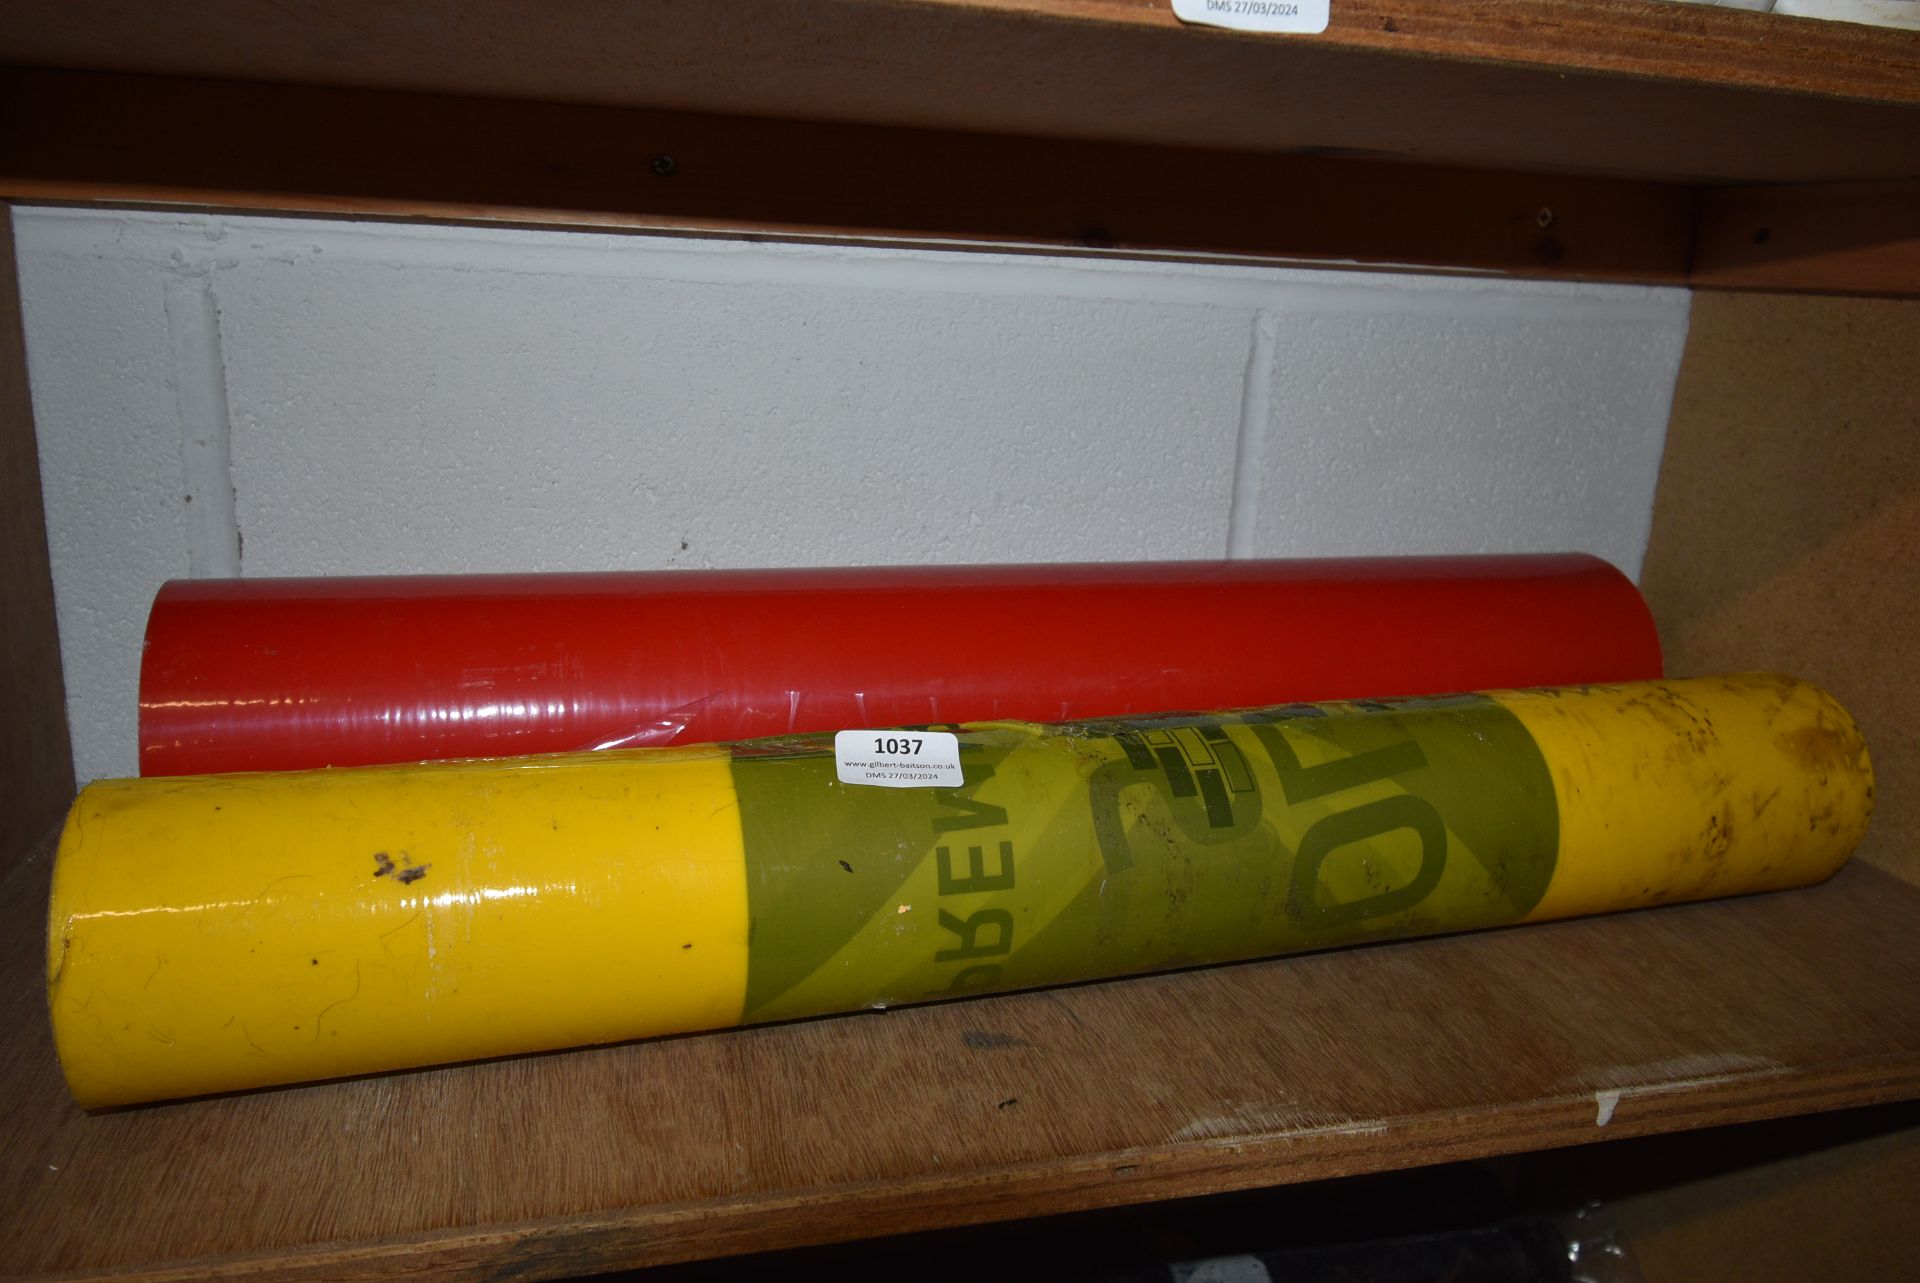 *Two Rolls of Floor Protector Cling Film (Location: 64 King Edward St, Grimsby, DN31 3JP, Viewing